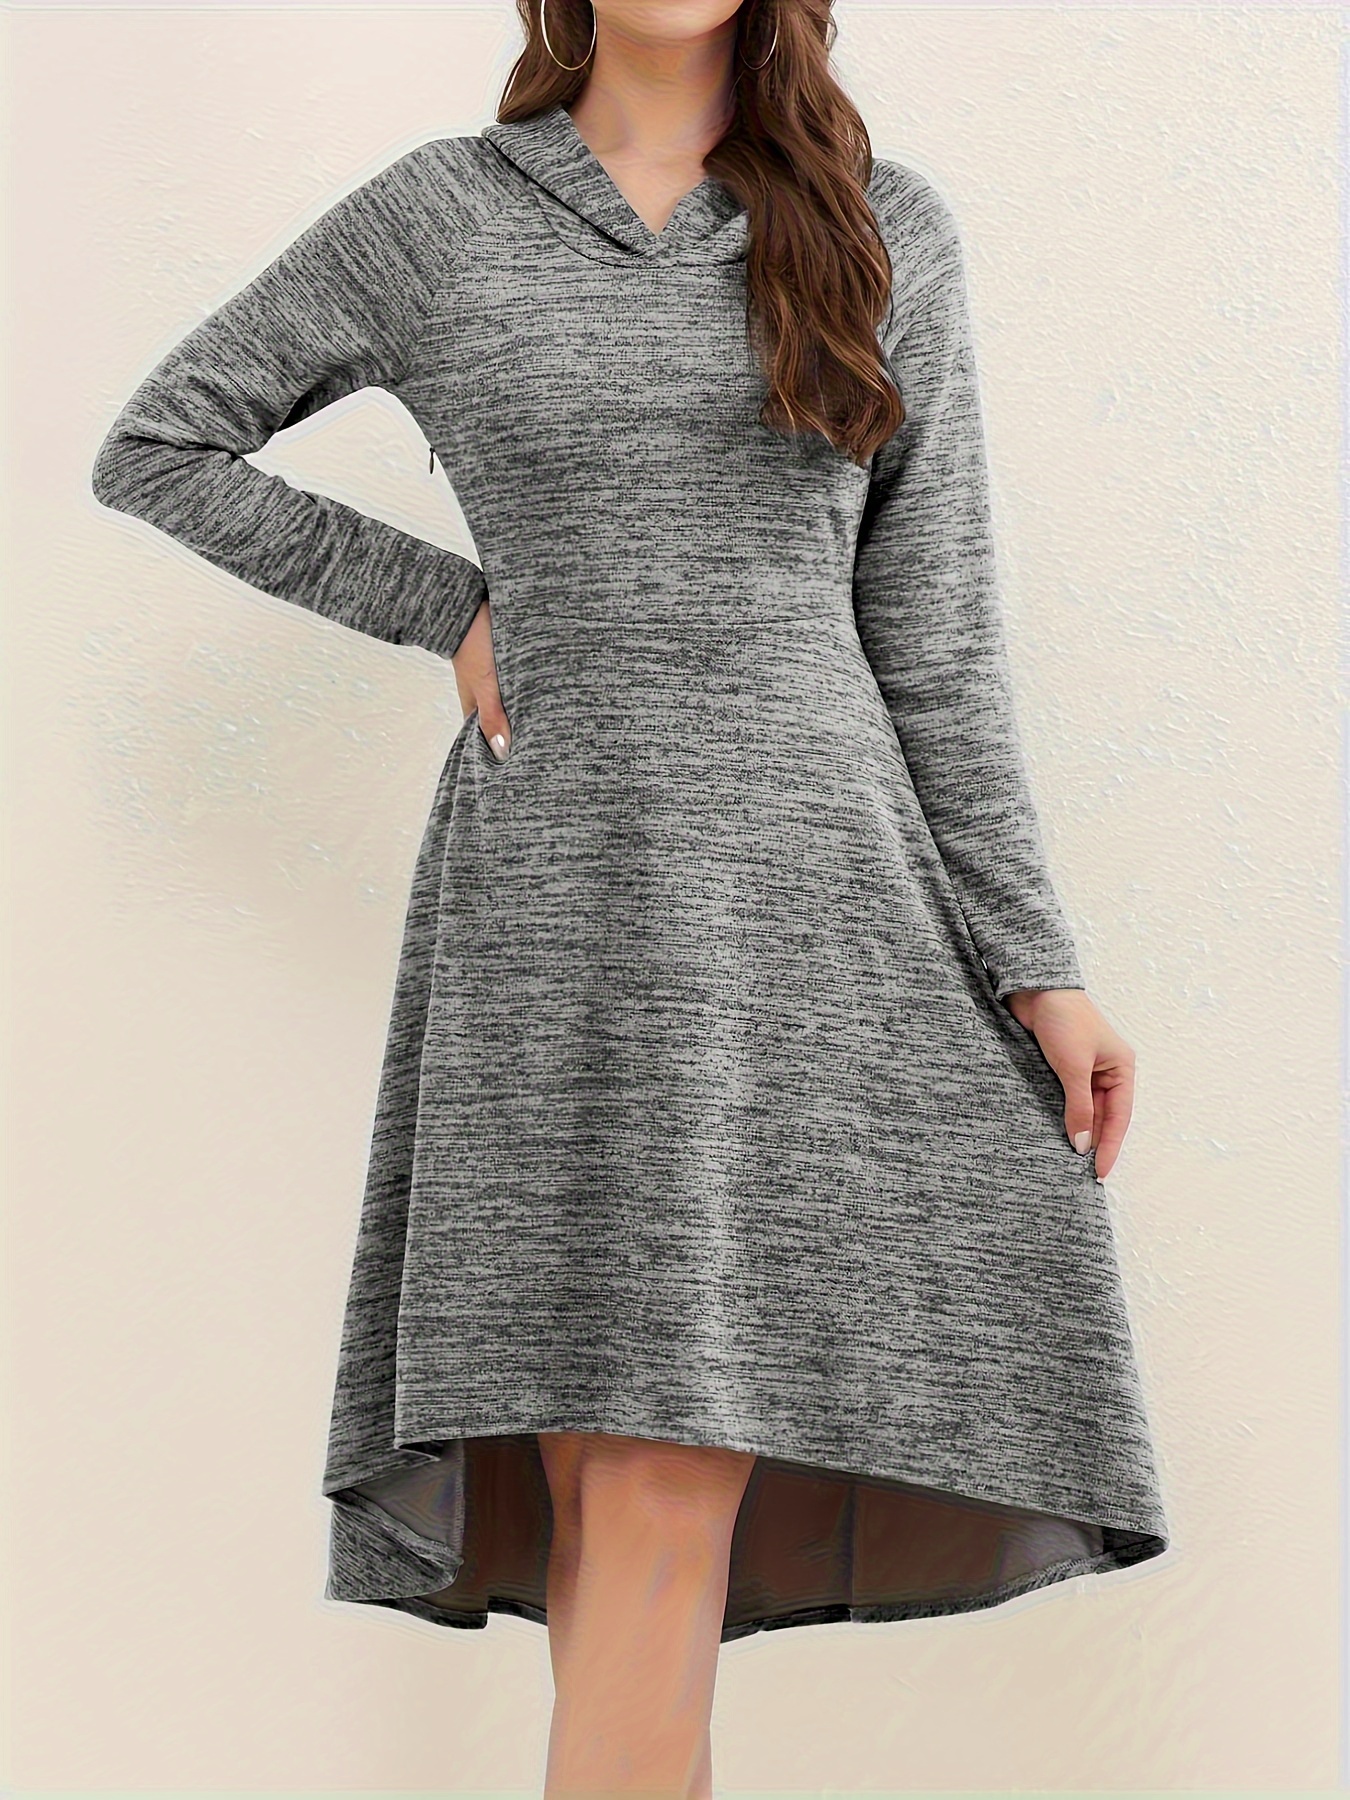 Dipped Hem Hooded Dress, Casual Long Sleeve Solid Dress, Women's Clothing